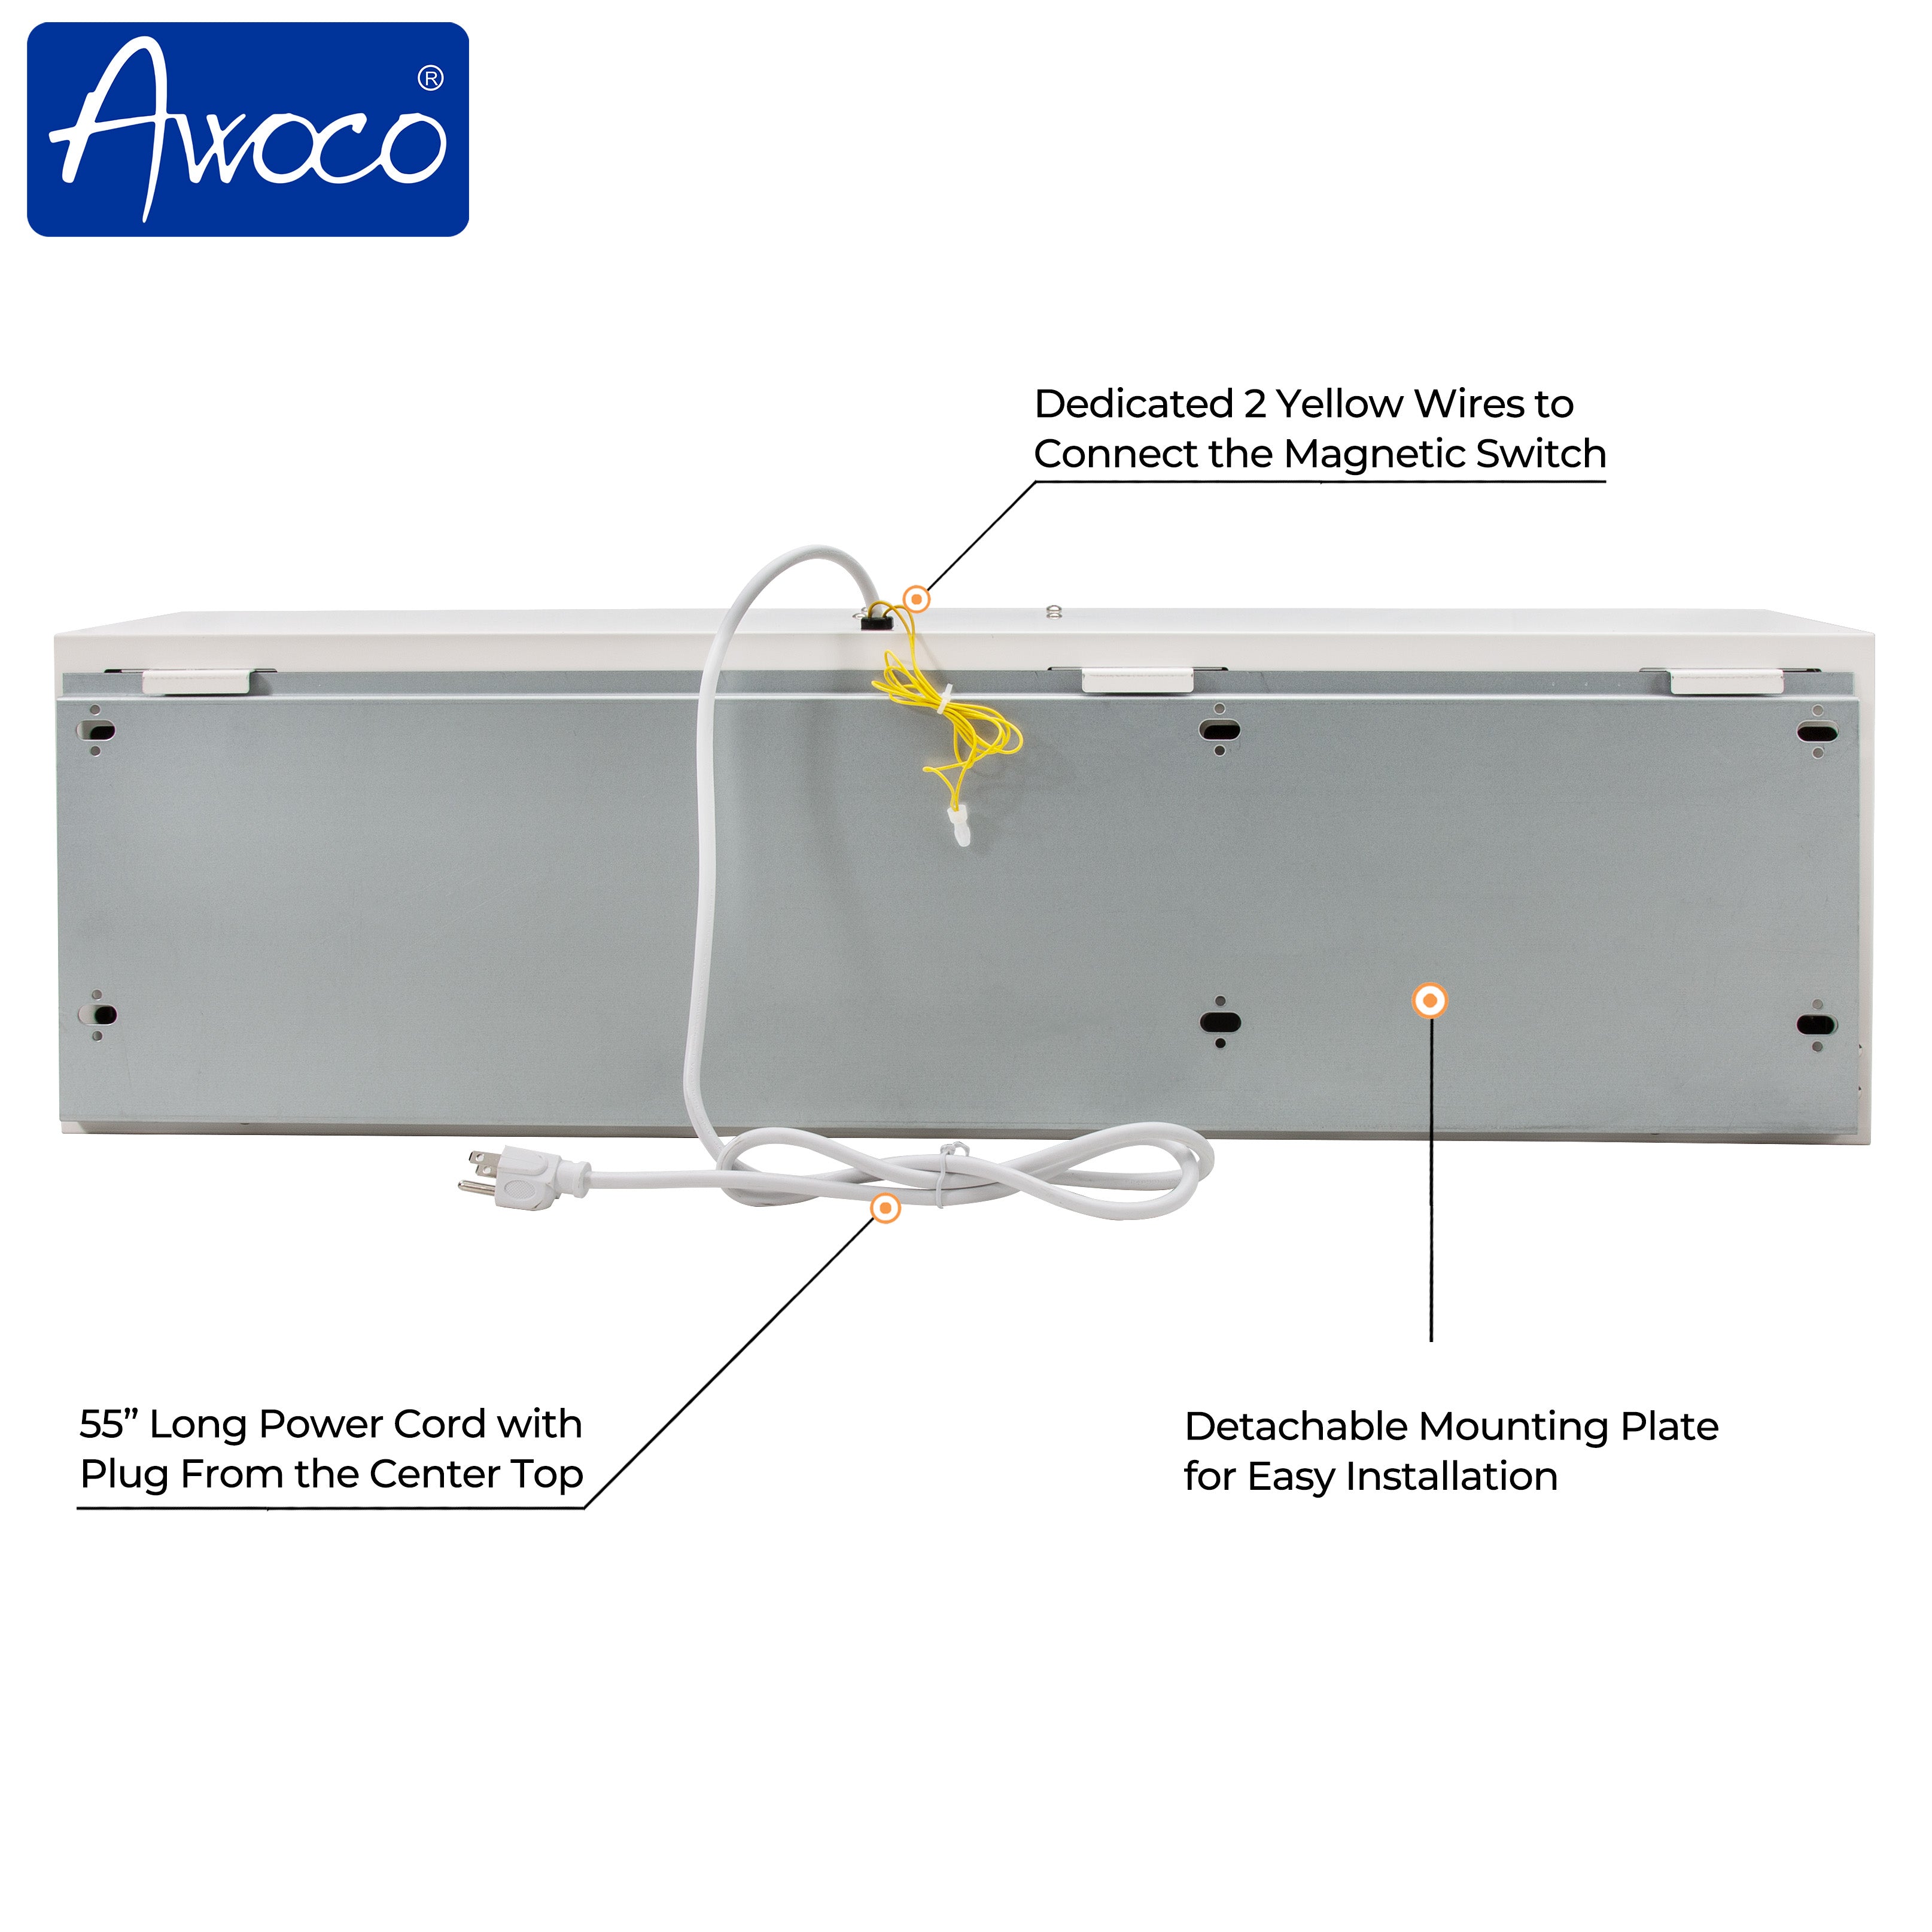 Awoco 42" Super Power 1 Speed 1400 CFM Commercial Indoor Air Curtain, 120V Unheated, ETL & UL Certified to Meet NSF 37 Food Service Standard